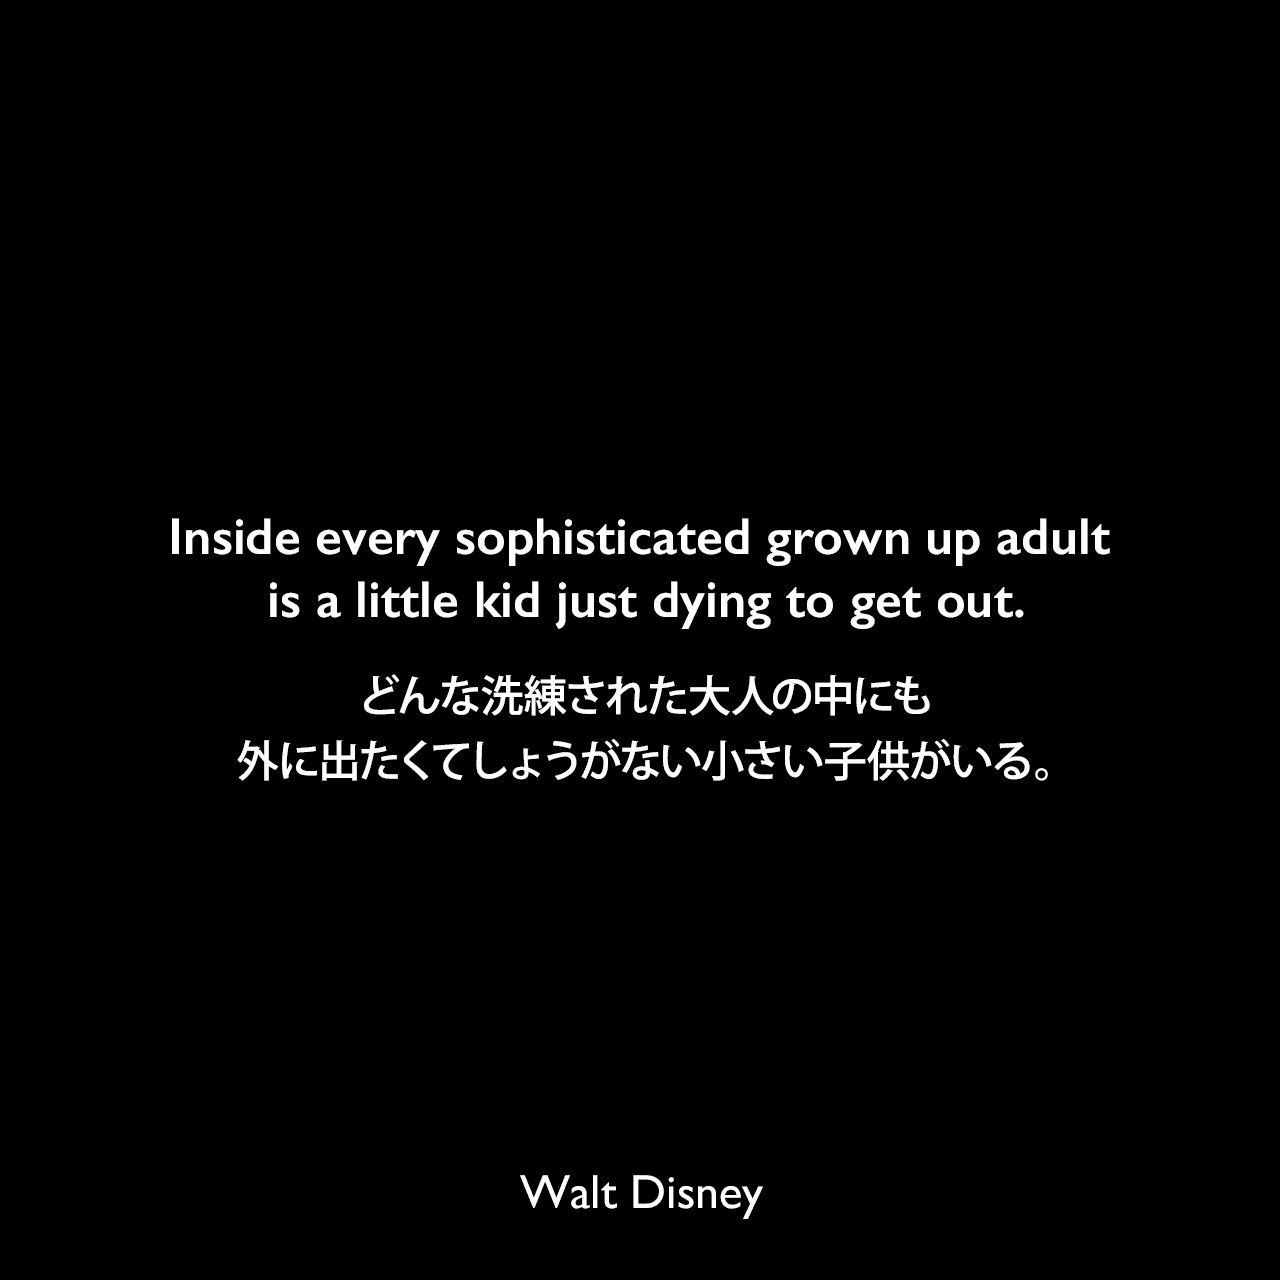 Inside every sophisticated grown up adult is a little kid just dying to get out.どんな洗練された大人の中にも、外に出たくてしょうがない小さい子供がいる。Walt Disney